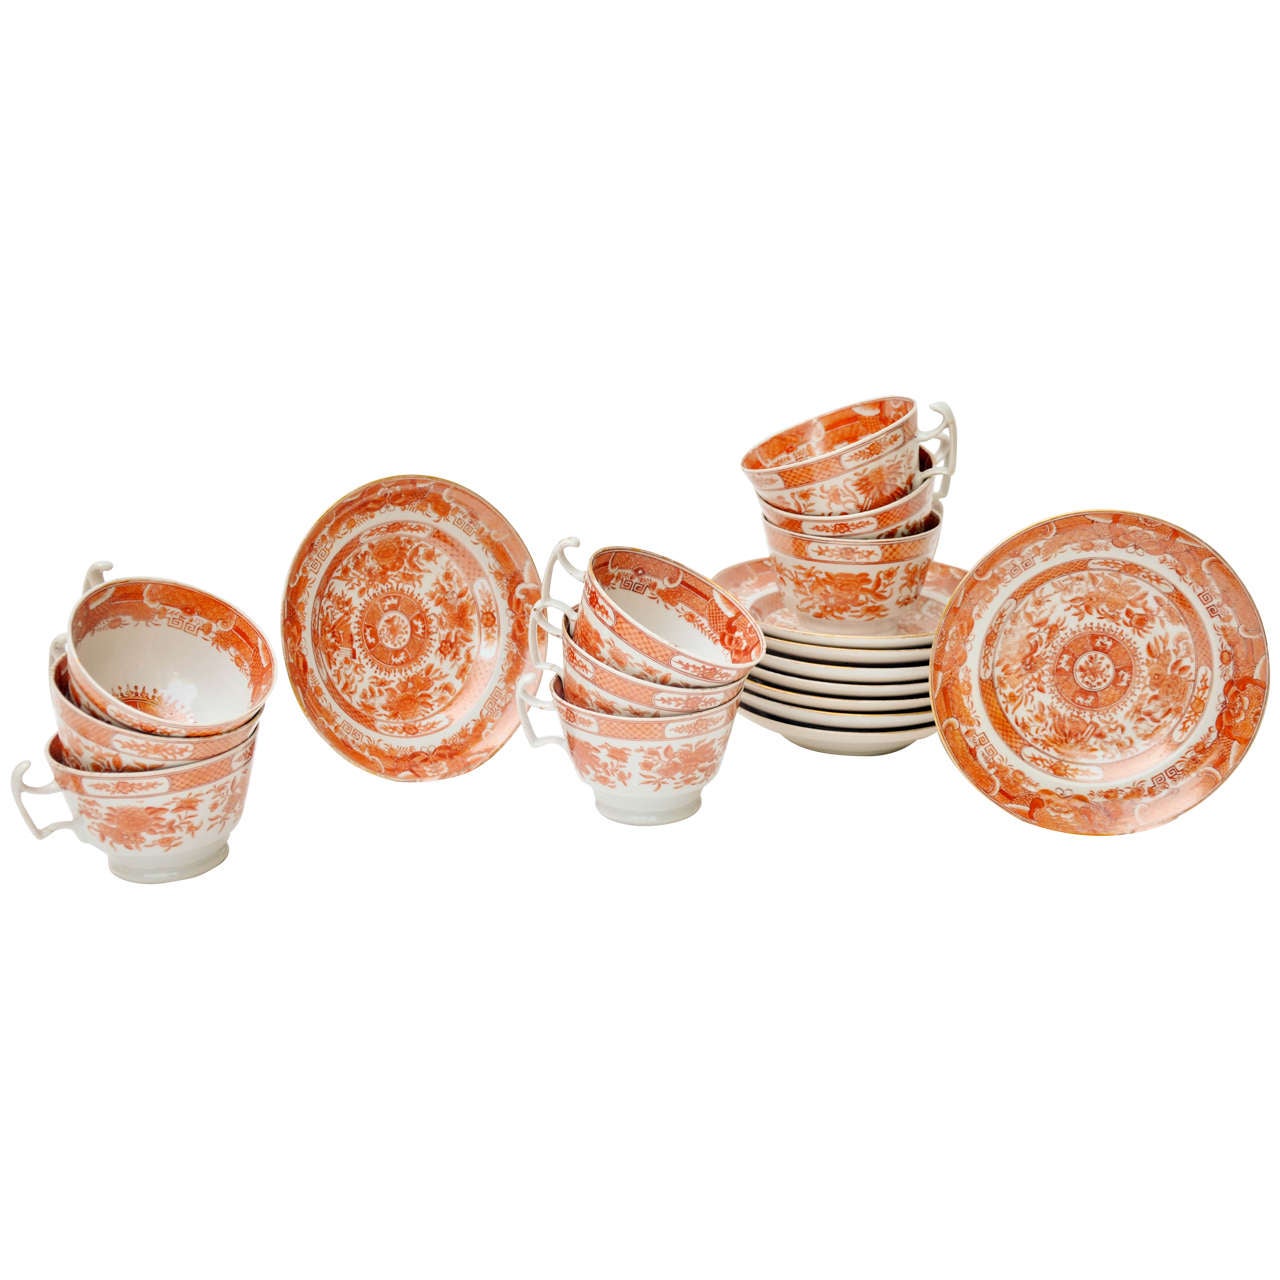 Set of Eight Chinese Export Orange Fitzhugh Tea Cups and Saucers, circa 1840